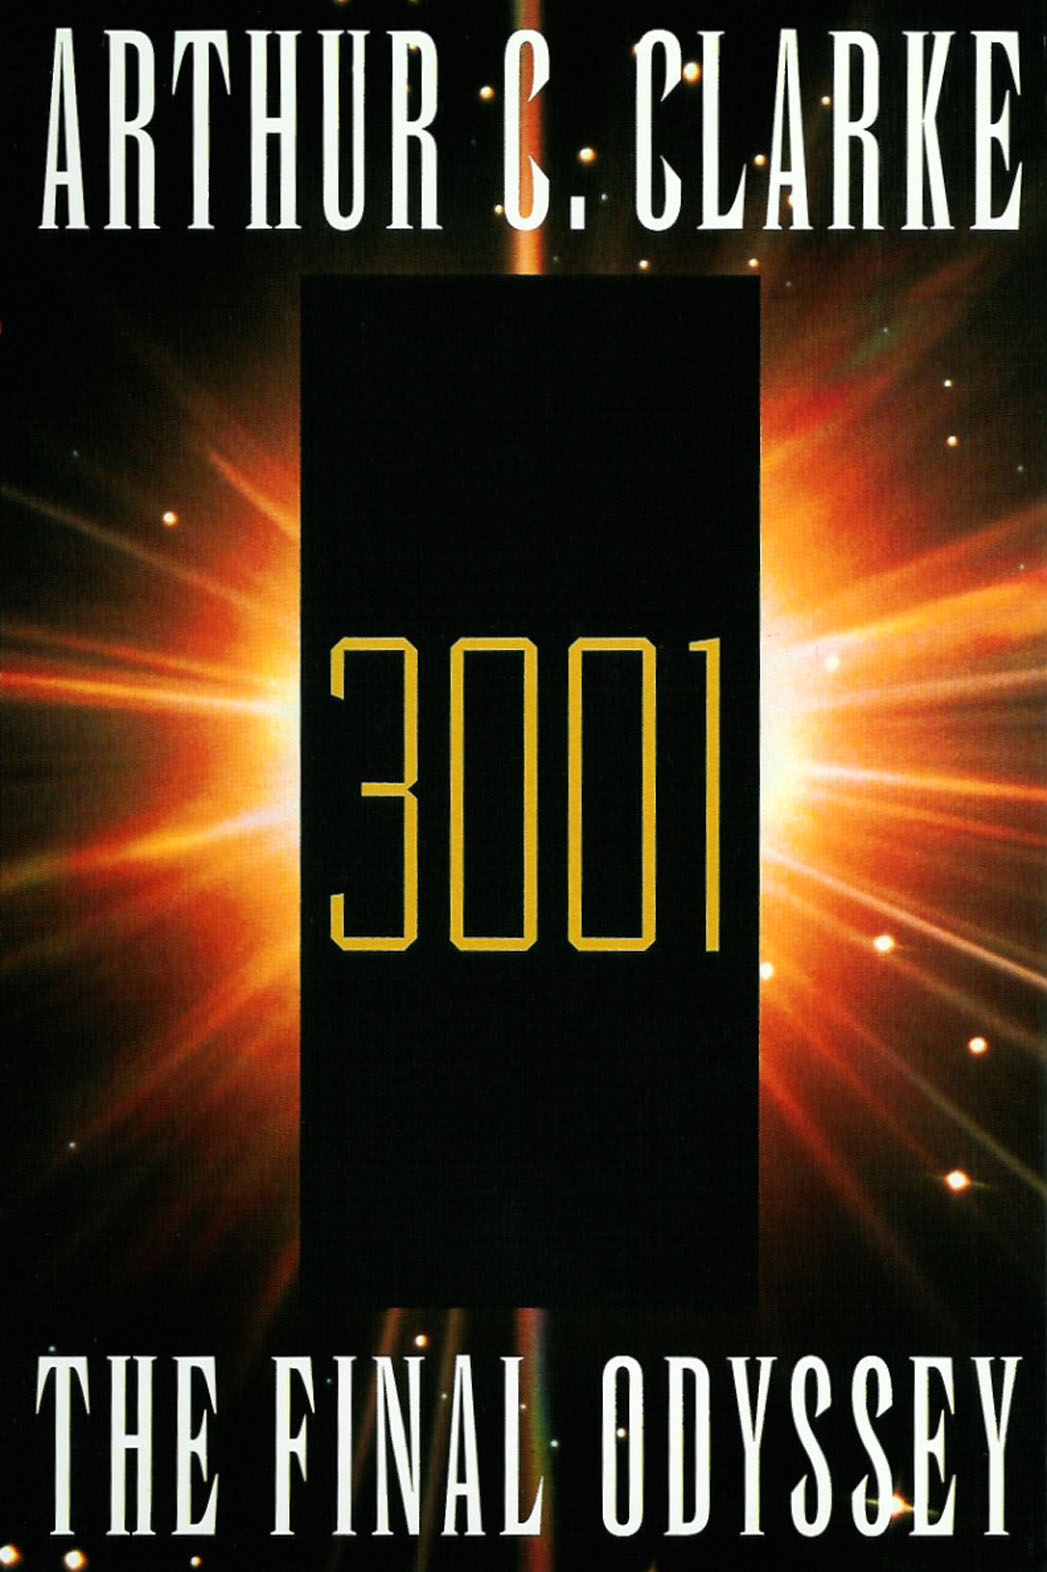 3001: The Final Odyssey (1997)